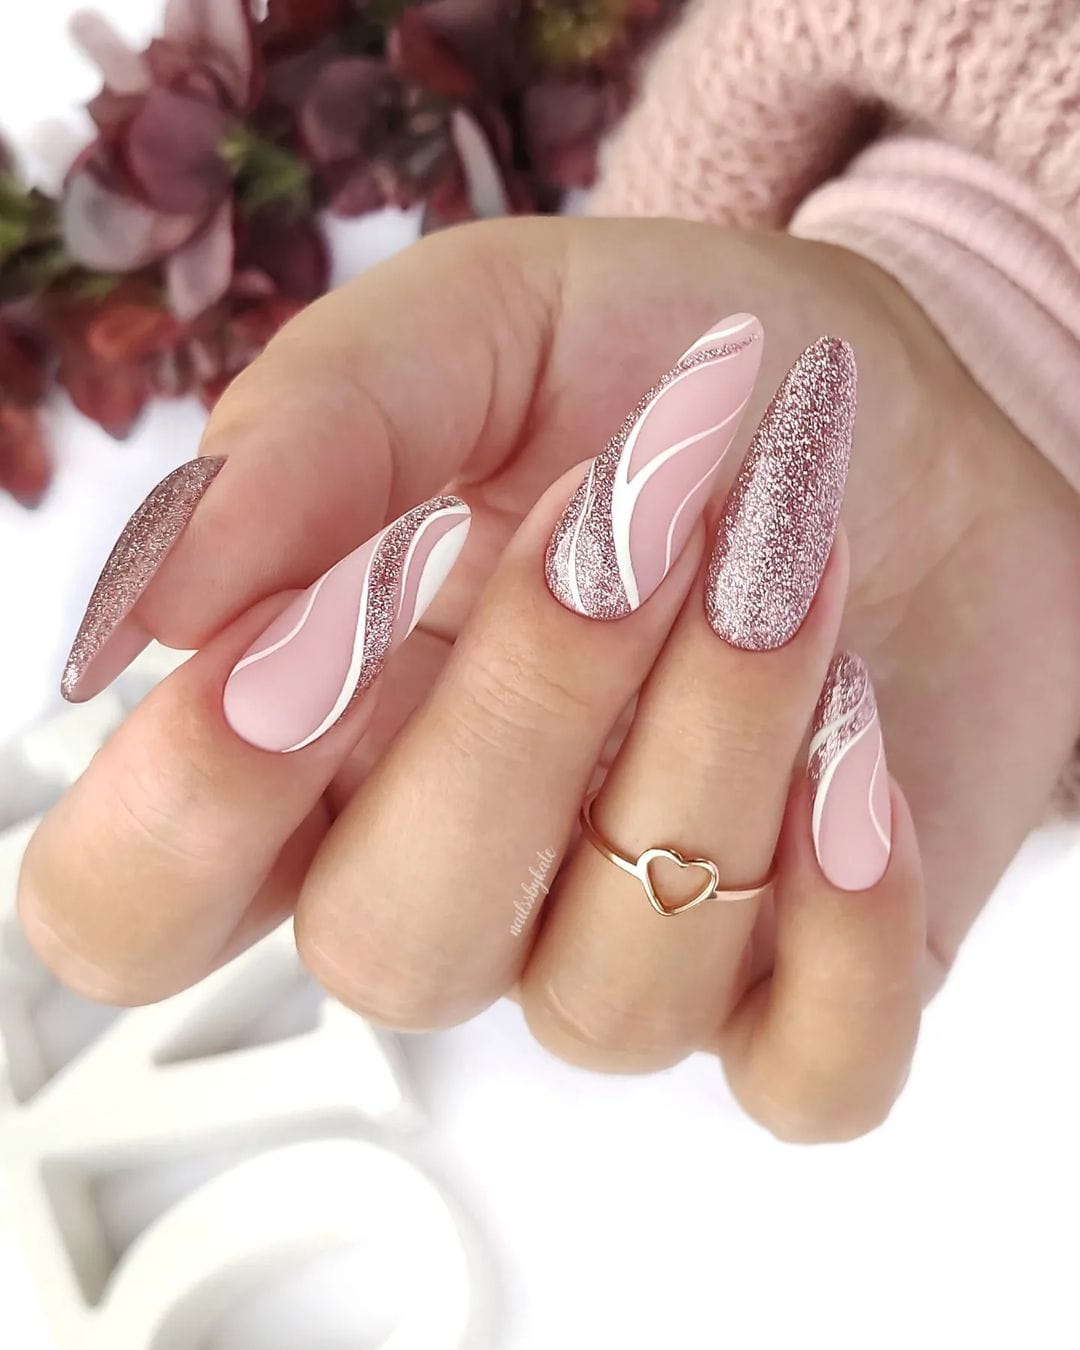 100+ Best Winter Nail Ideas And Designs To Try images 10